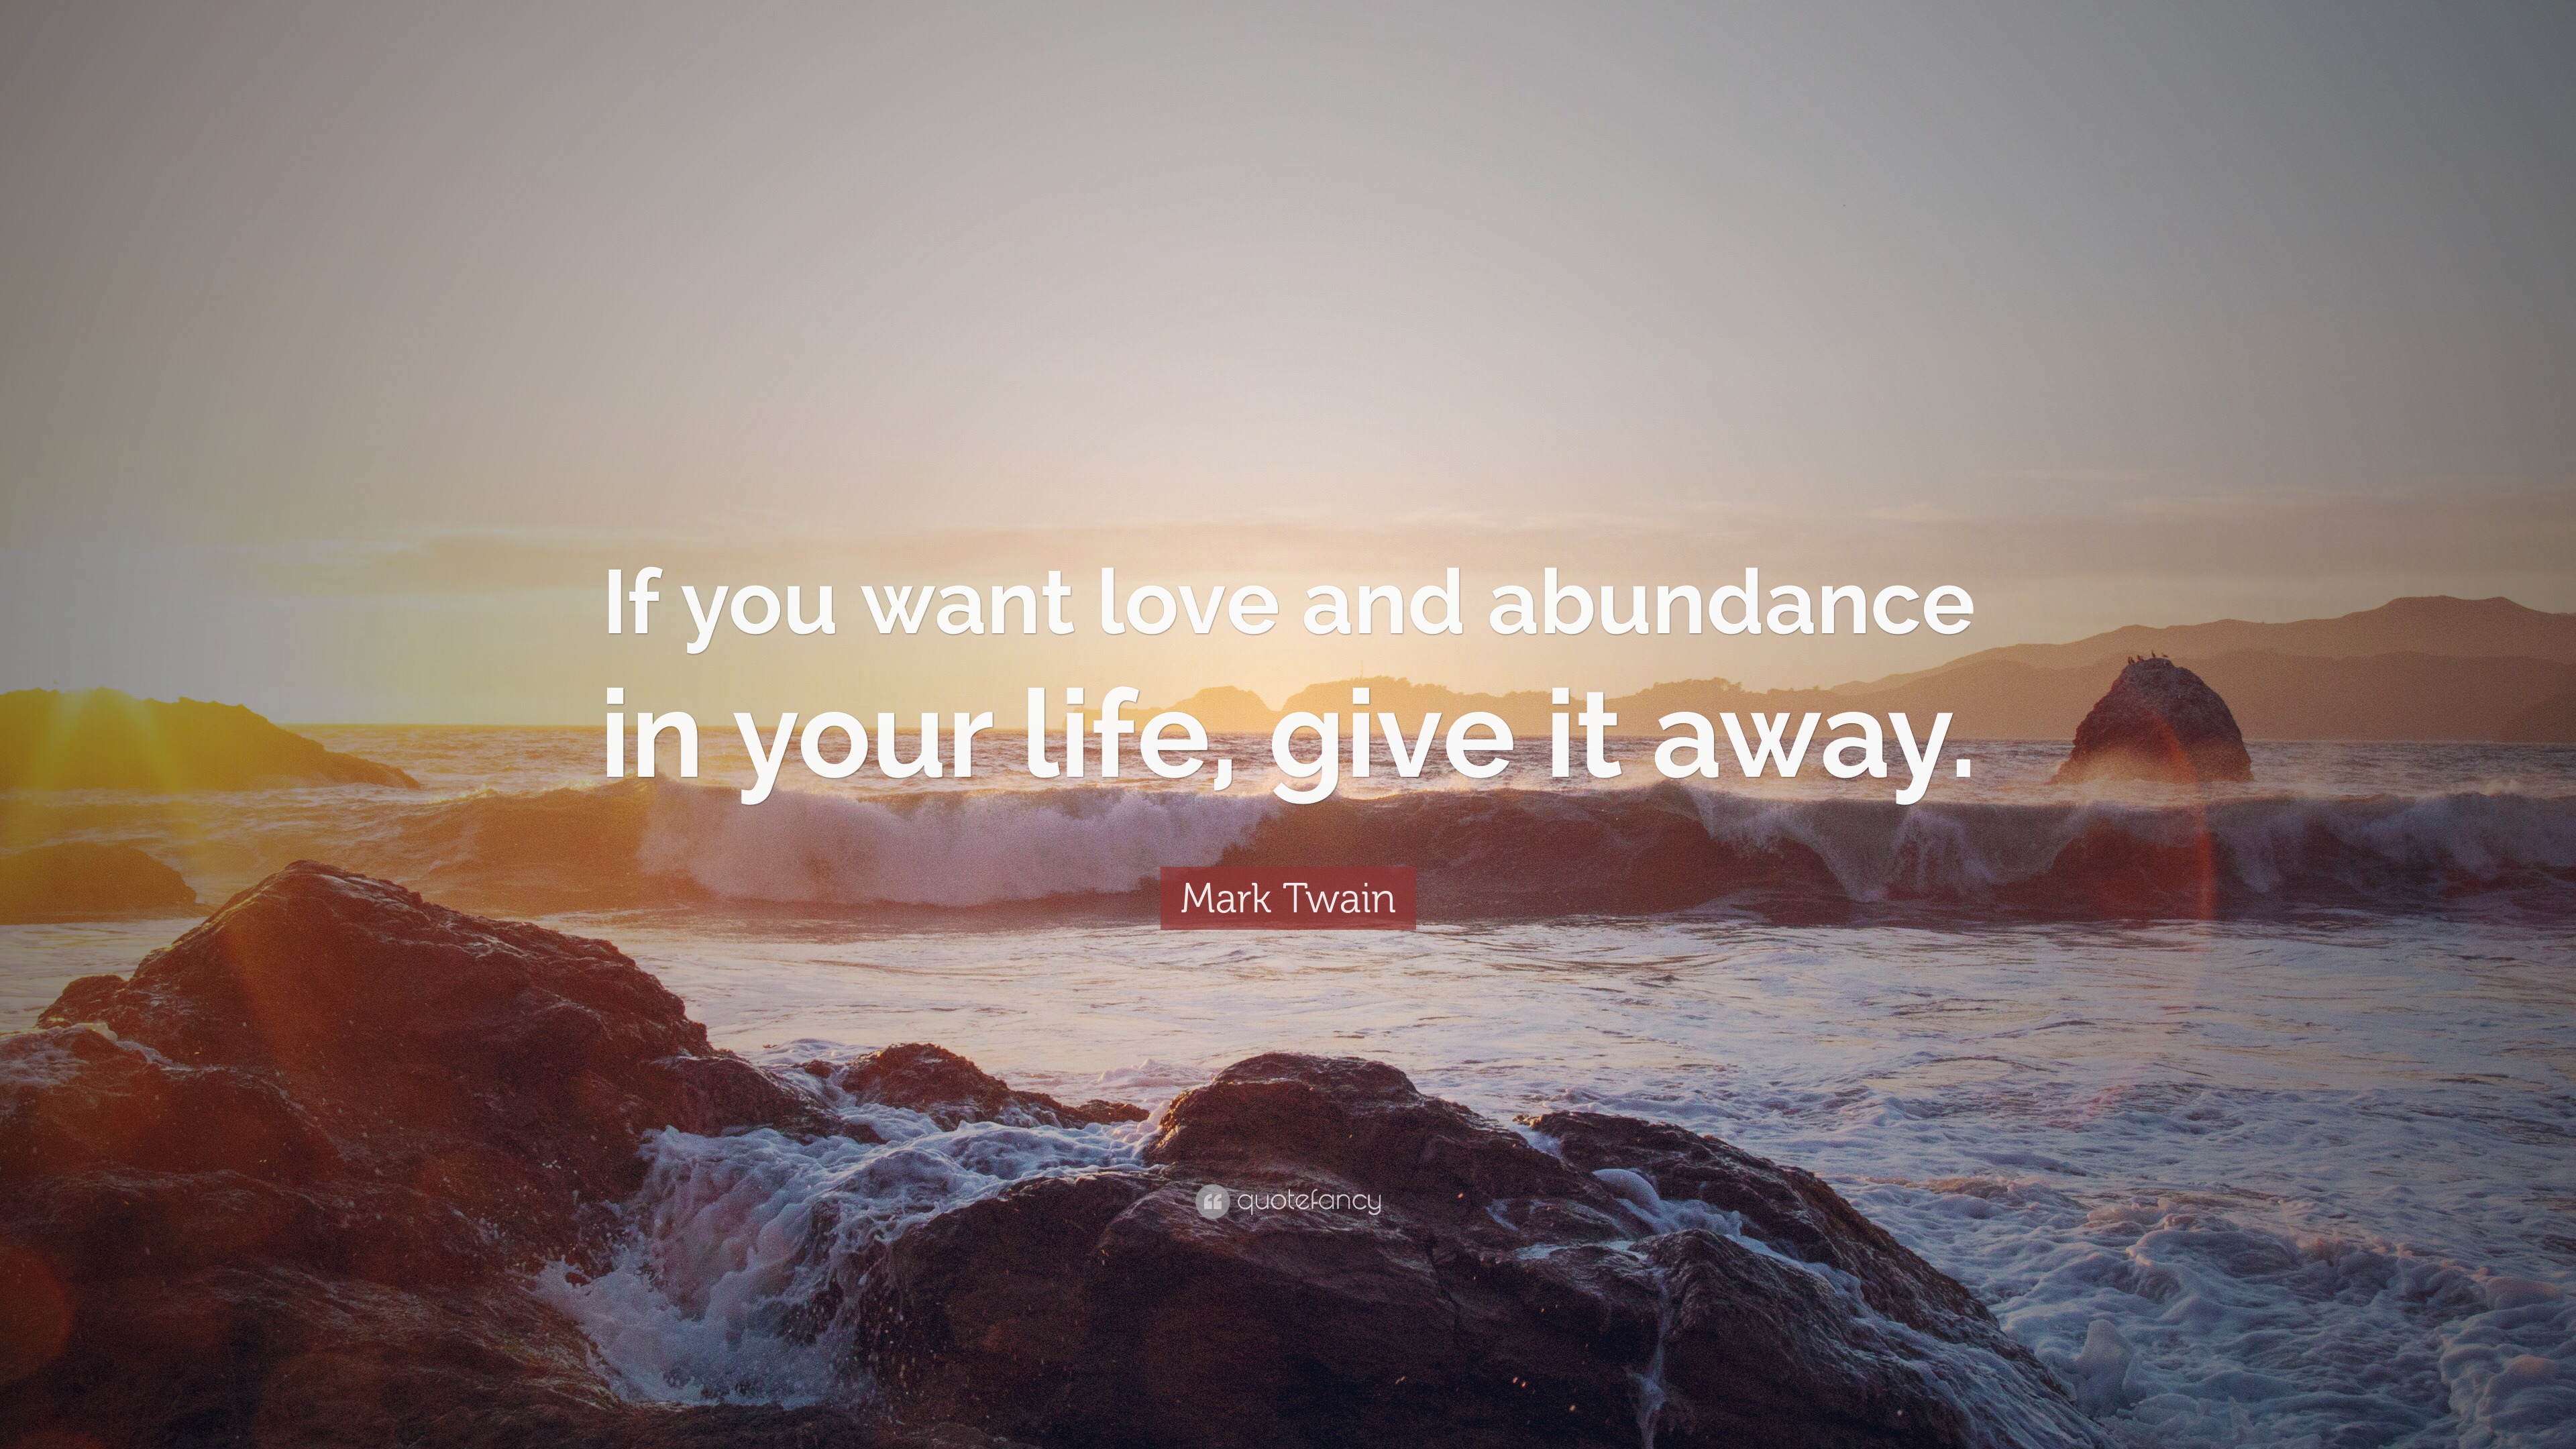 Mark Twain Quote “If you want love and abundance in your life give